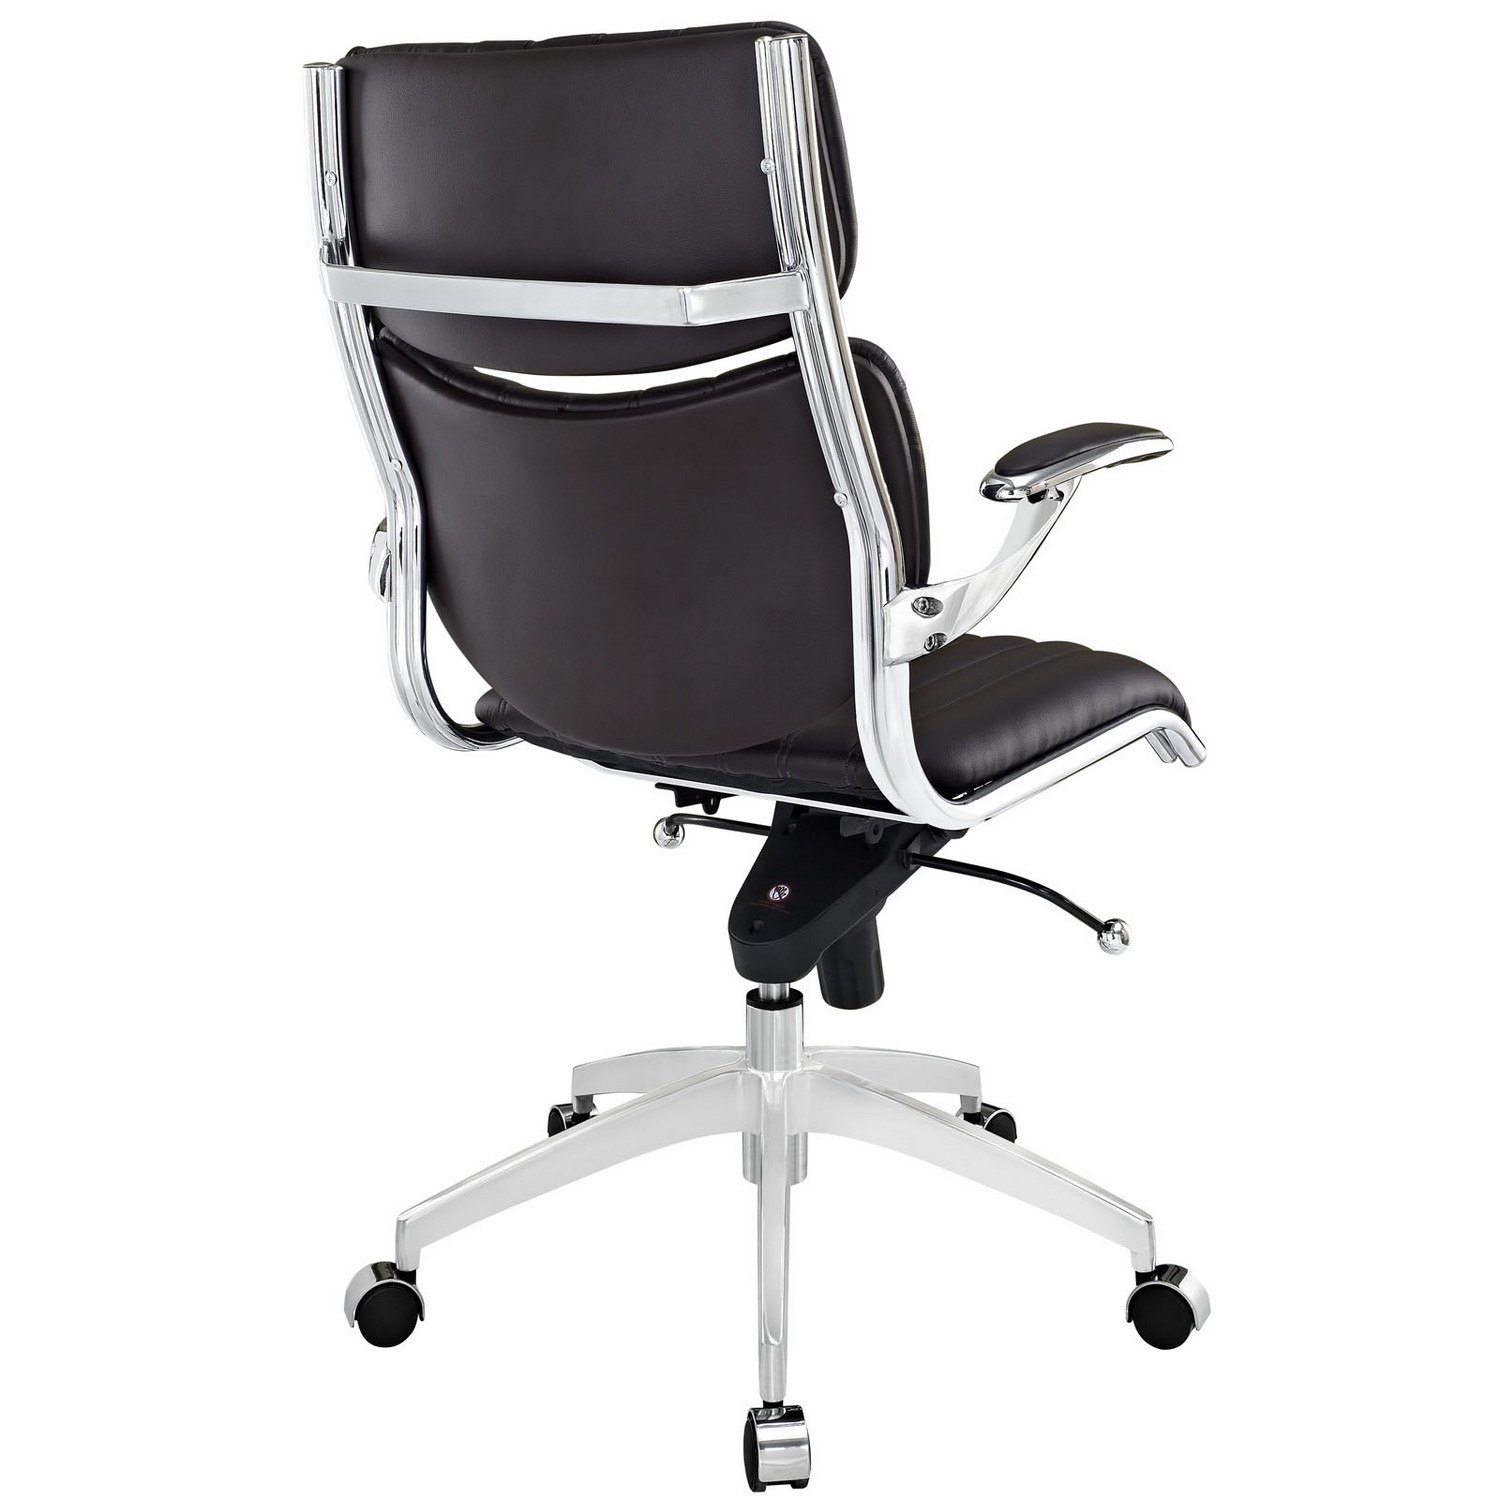 Modway Escape Mid Back Office Chair - Brown